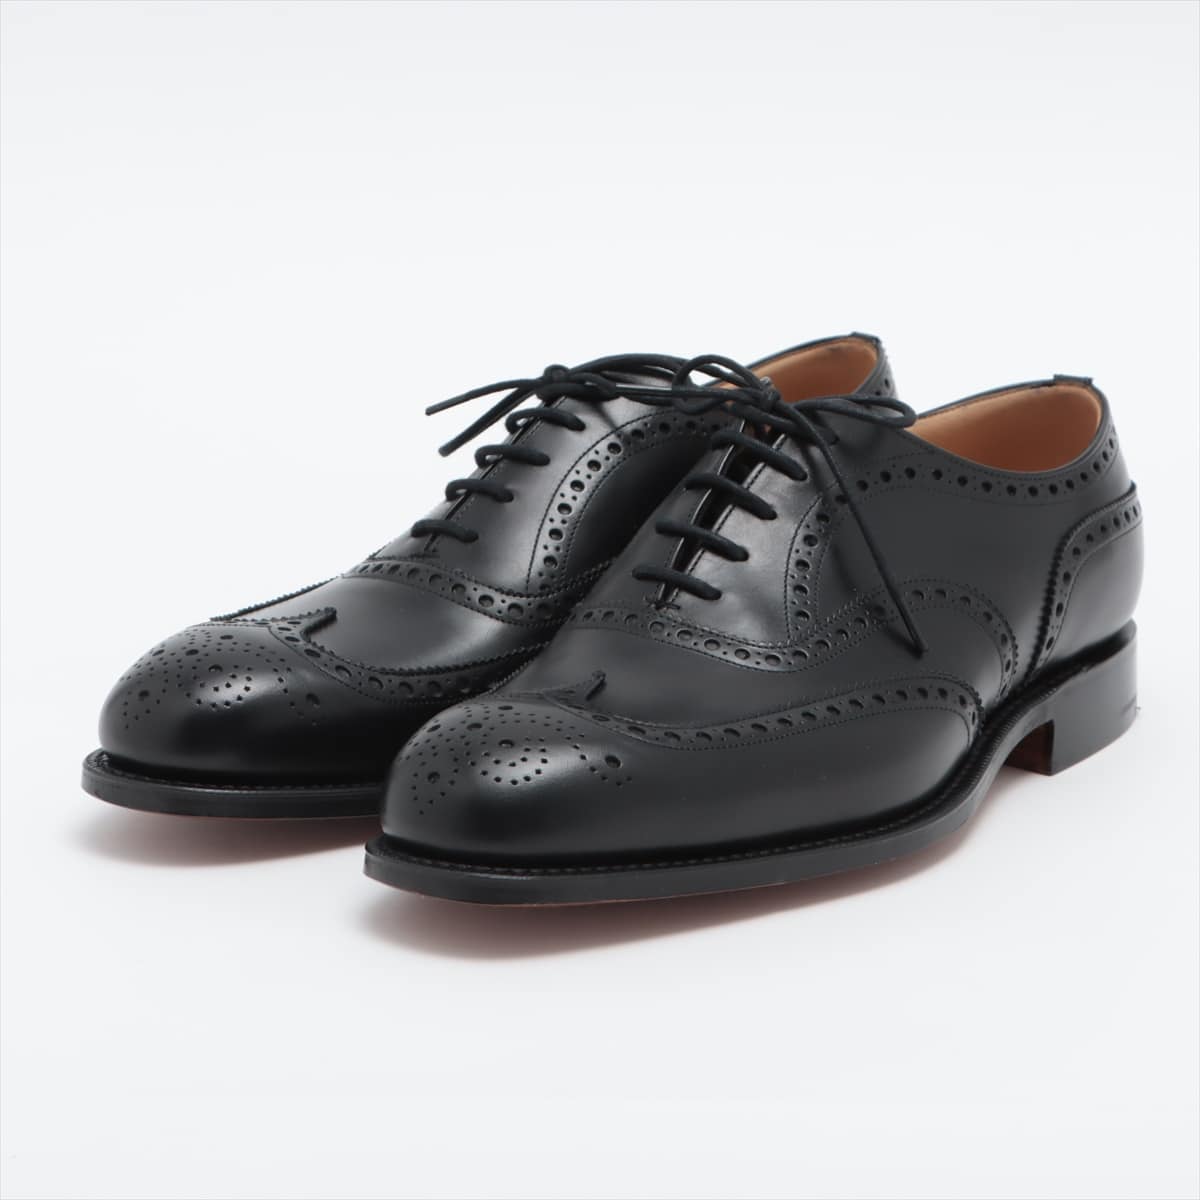 Church's Leather Dress shoes 65F Men's Black CHETWYND Chetwind Last 173 wingtip